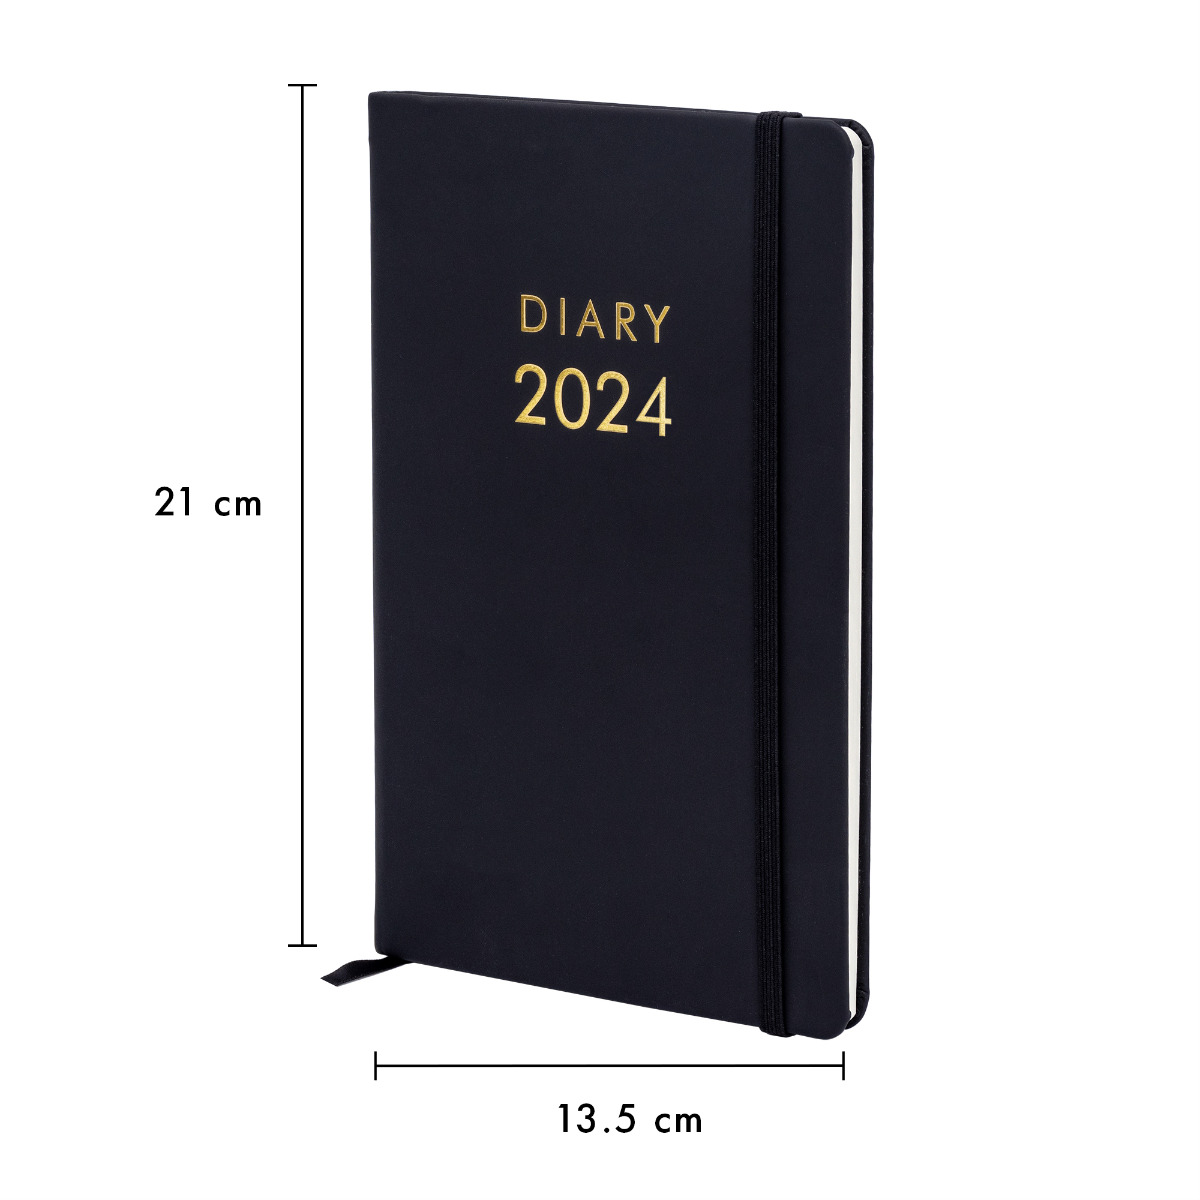 2024 A6 SOFT COVER DIARY- weekly - black colour